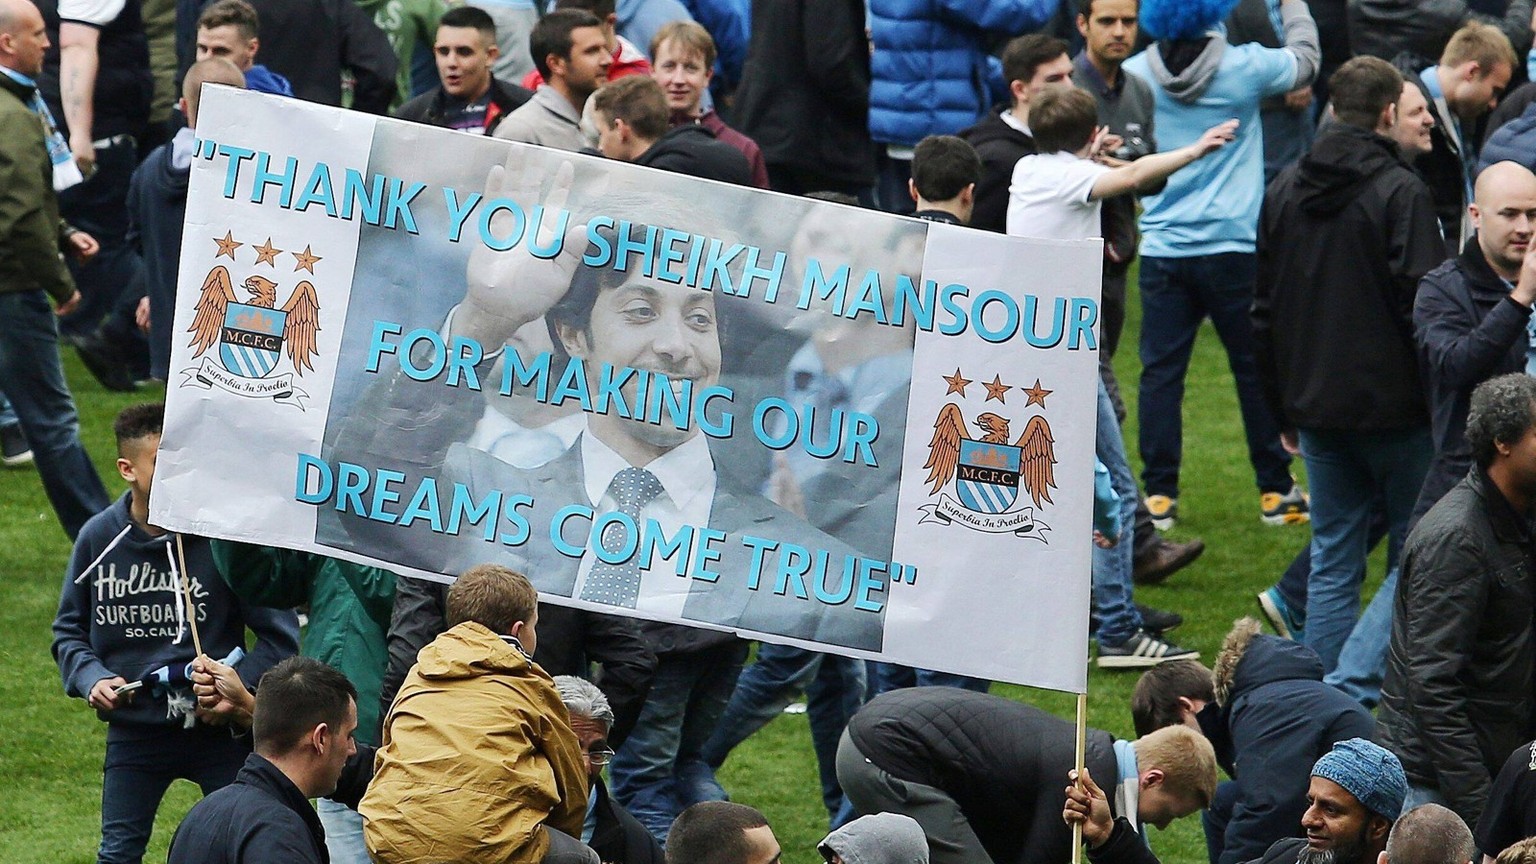 Mandatory Credit: Photo by Matt West/BPI/Shutterstock 3741997bd Manchester City fans display a banner aimed at owner Sheikh Mansour Barclays Premier League 2013/14, Manchester City v West Ham United,  ...